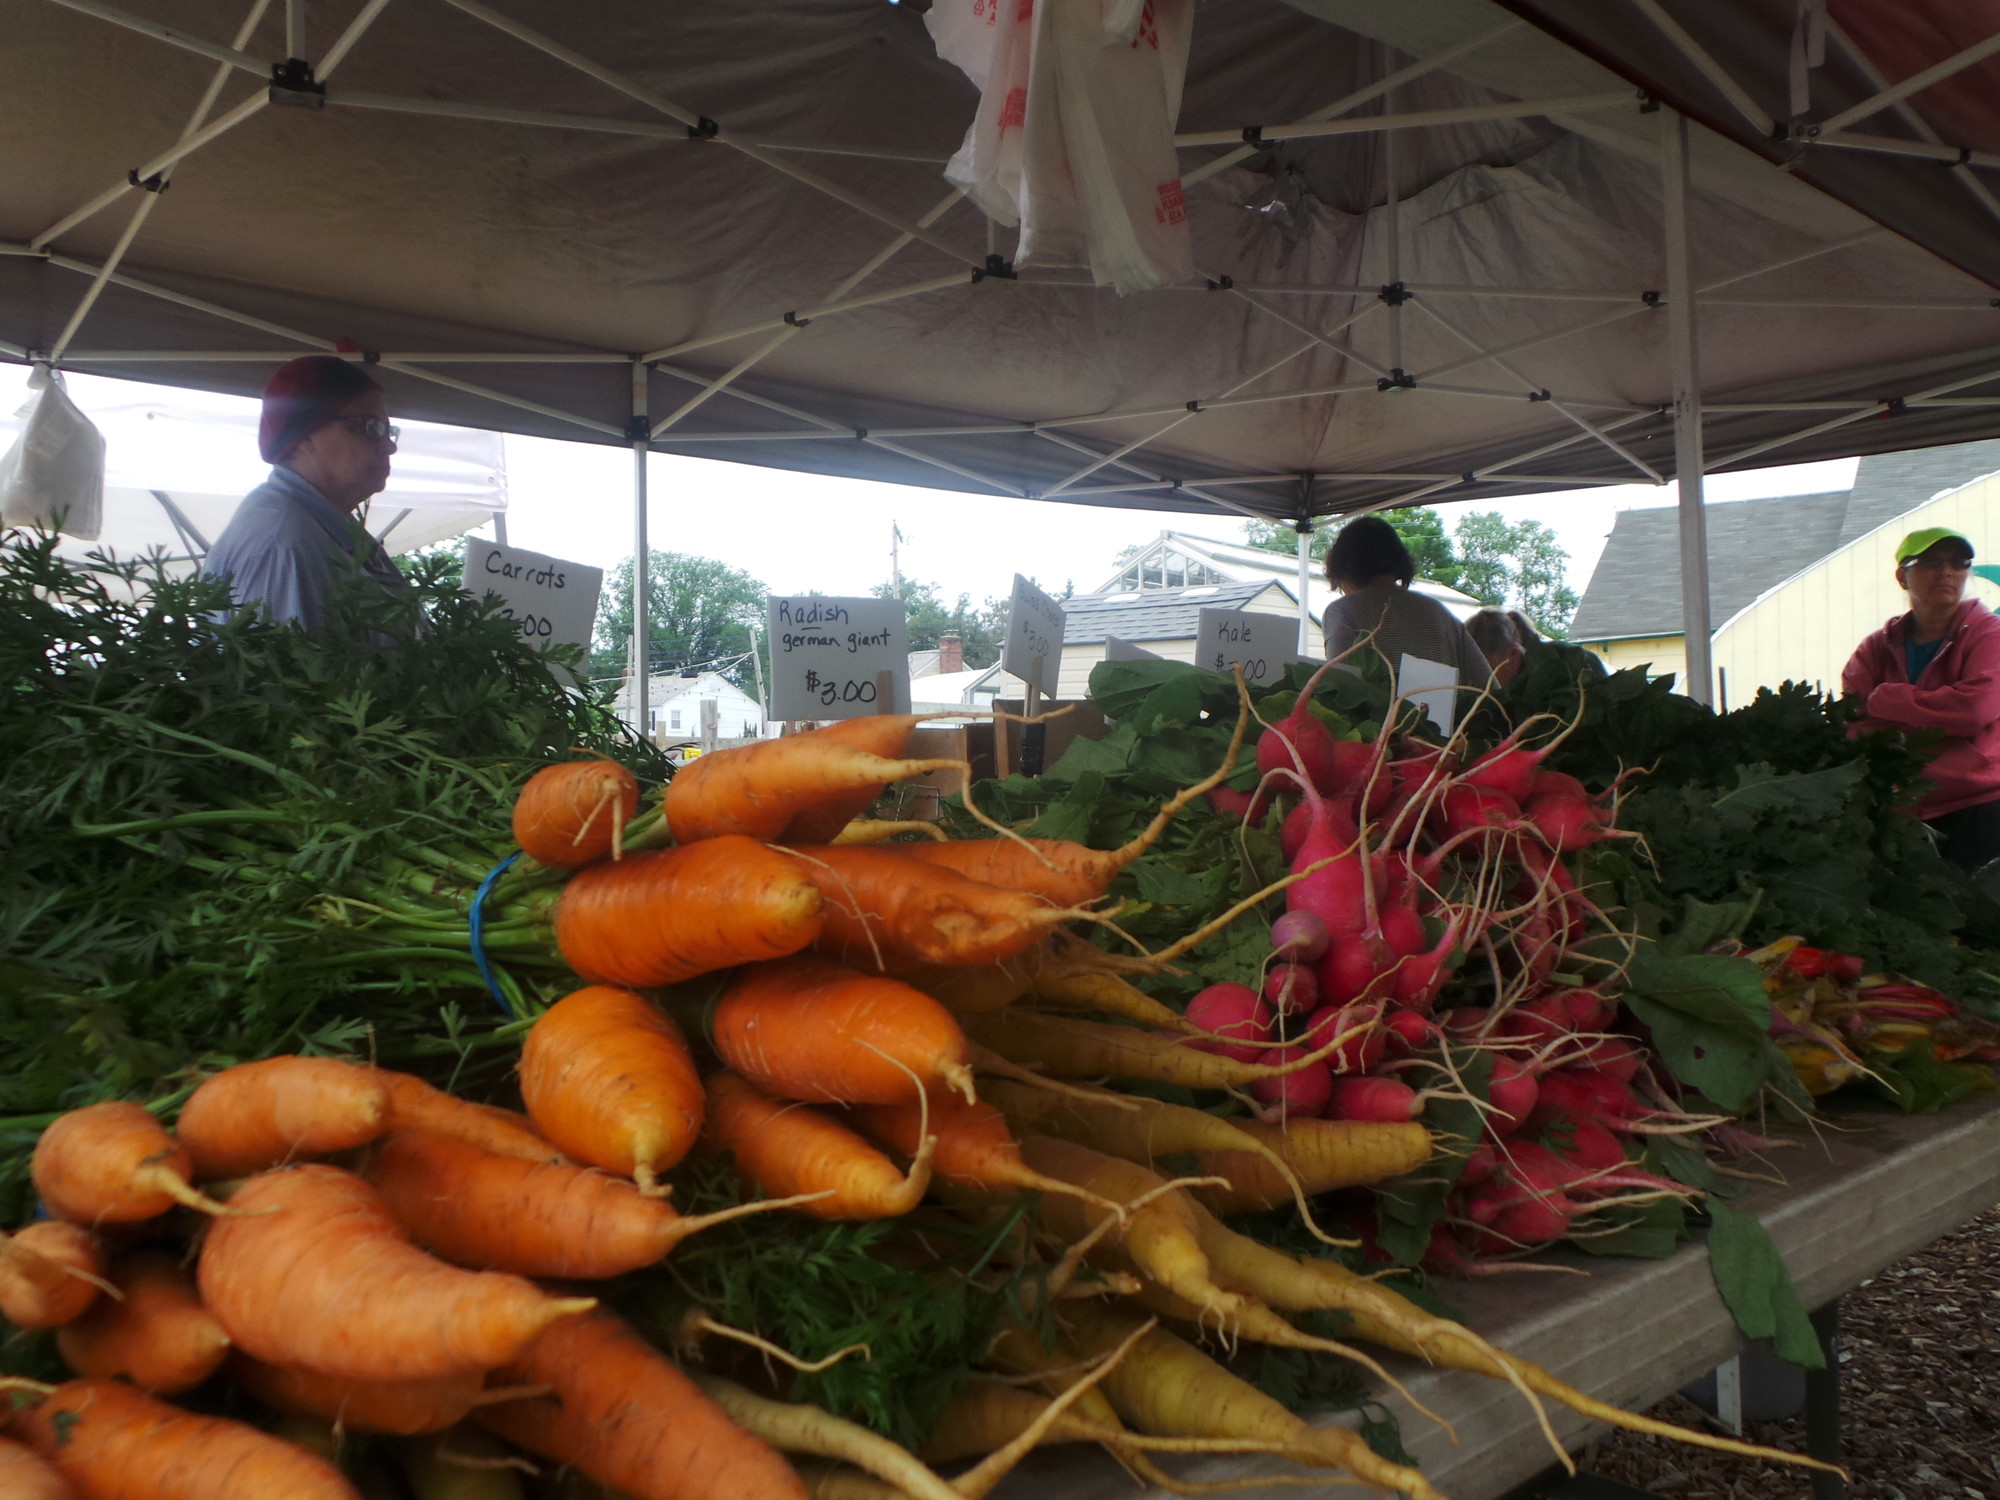 The Farmer's Market opens for the season this Saturday, June 4.